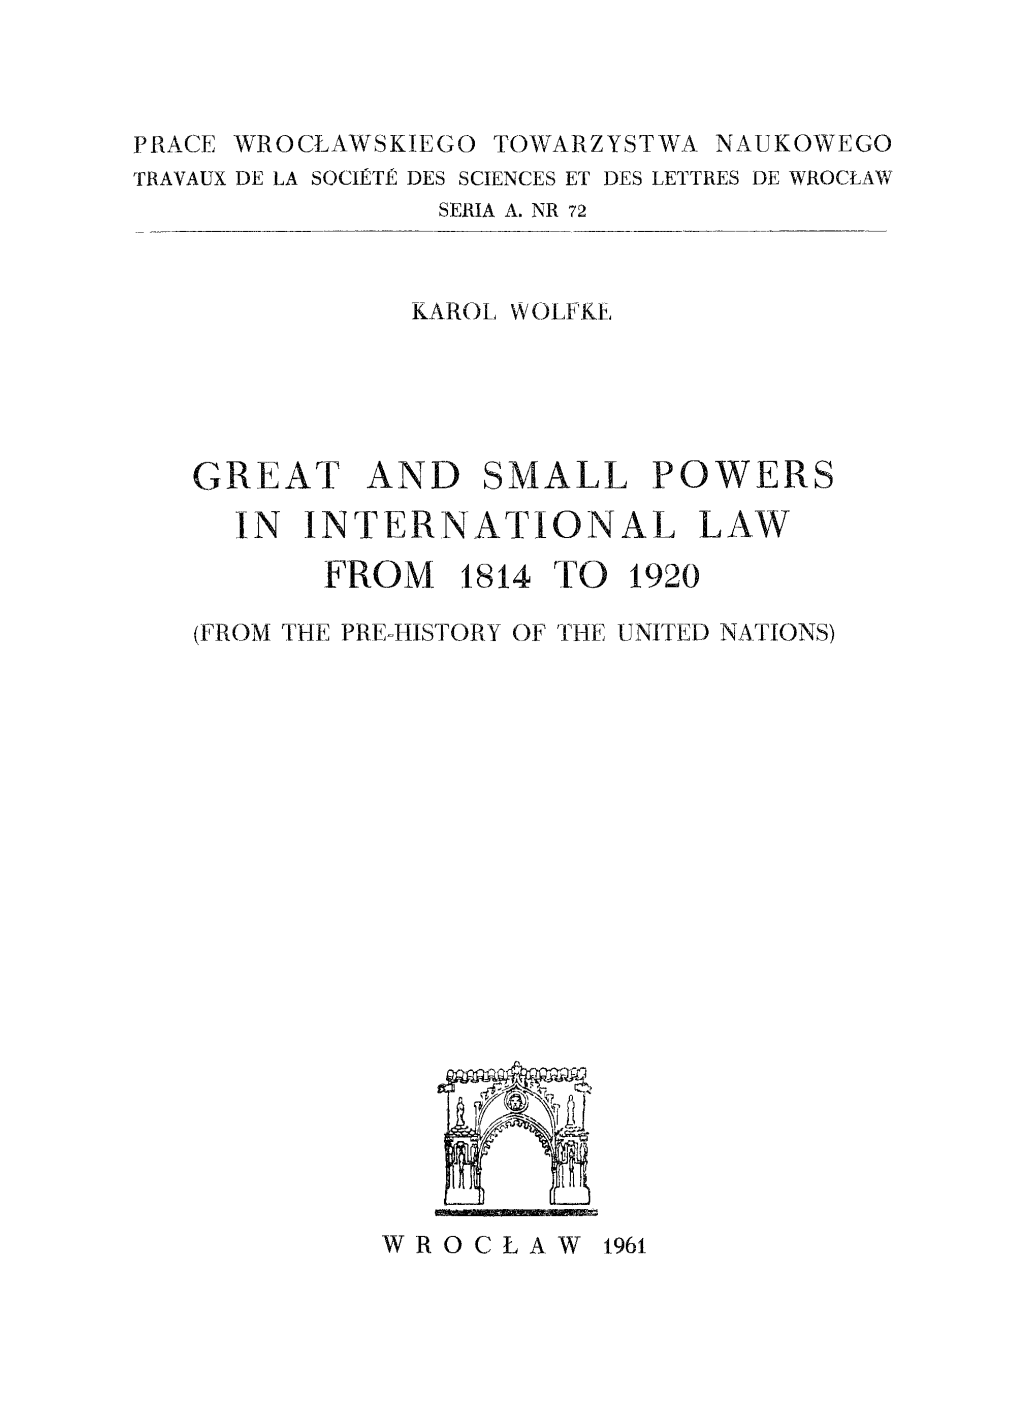 Great and Small Powers in International Law from 1814 to 1920